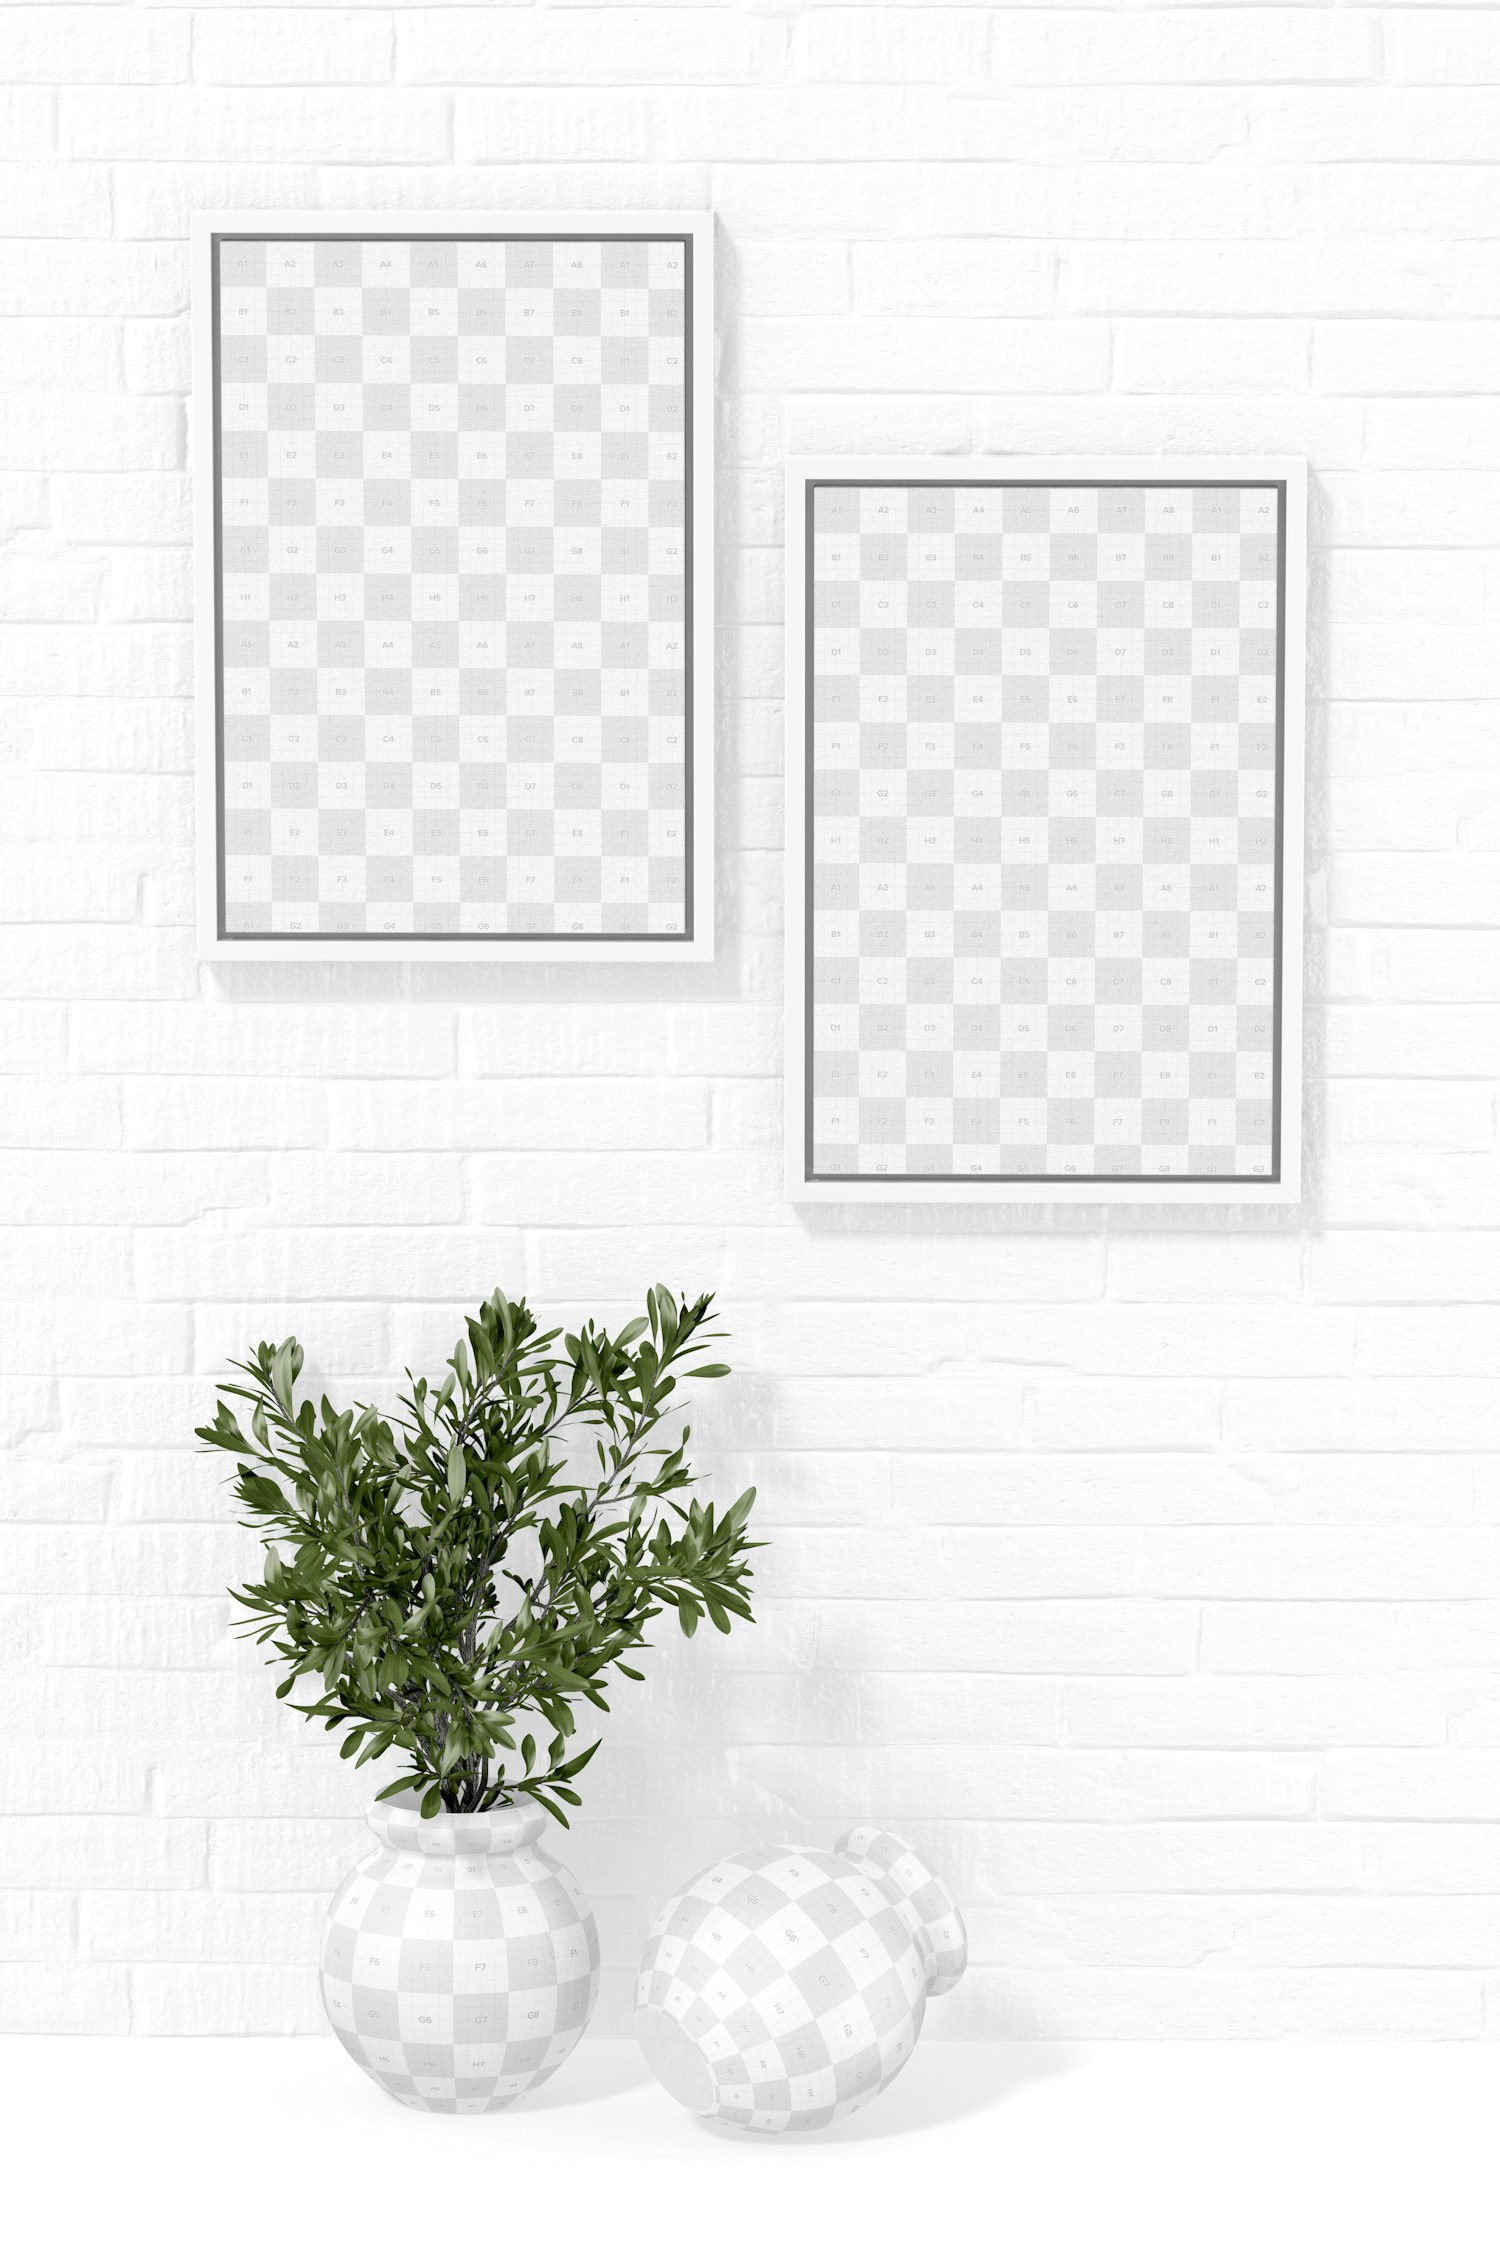 2:3 Portrait Canvases with Terracota Vases Mockup, Front View